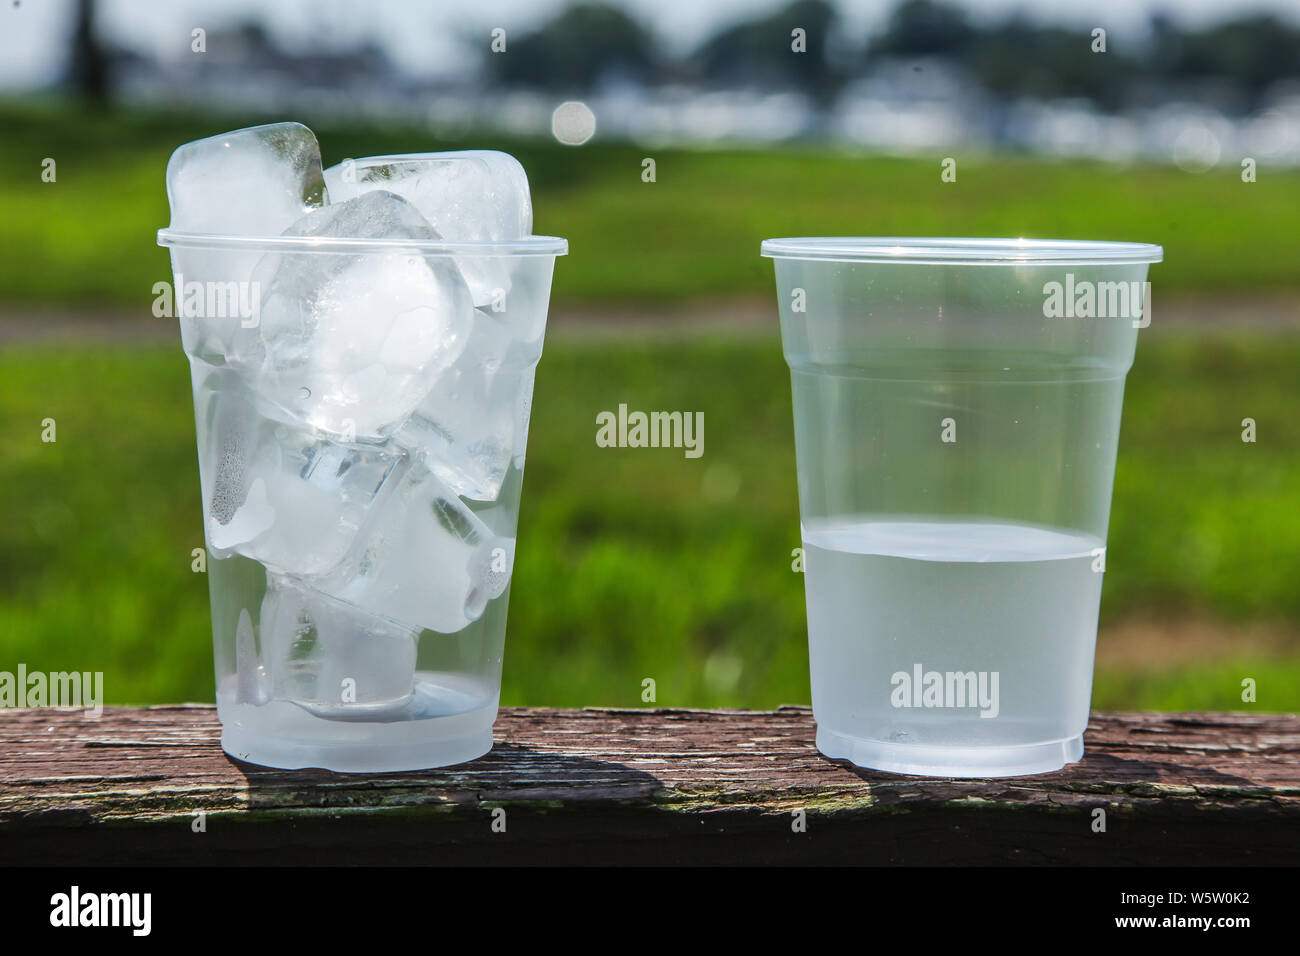 Cup full of ice with a second image of cup half full of water to show the ice melted outdoor Stock Photo